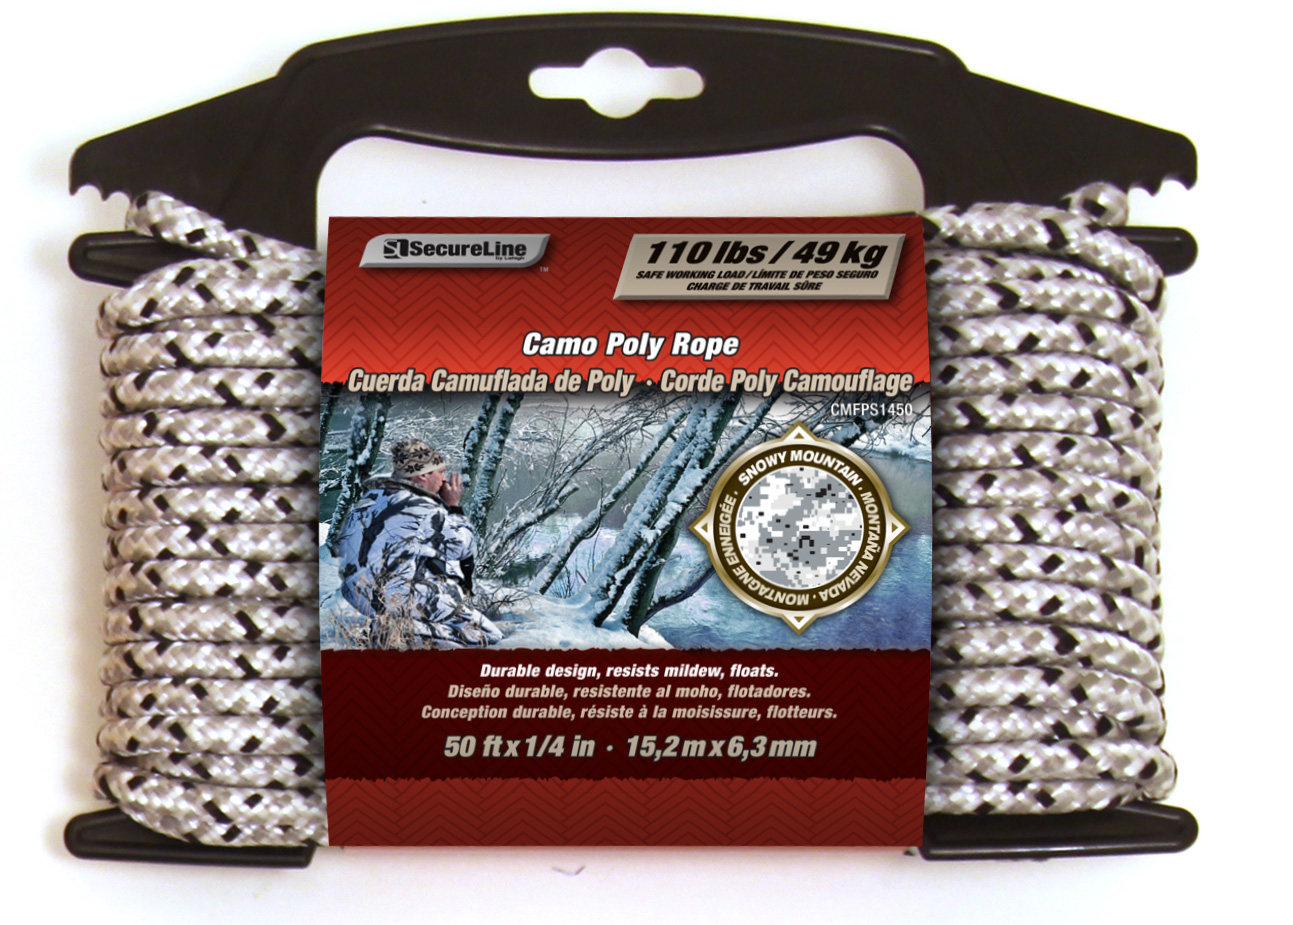 Secureline's Camouflage and Reflective Ropes